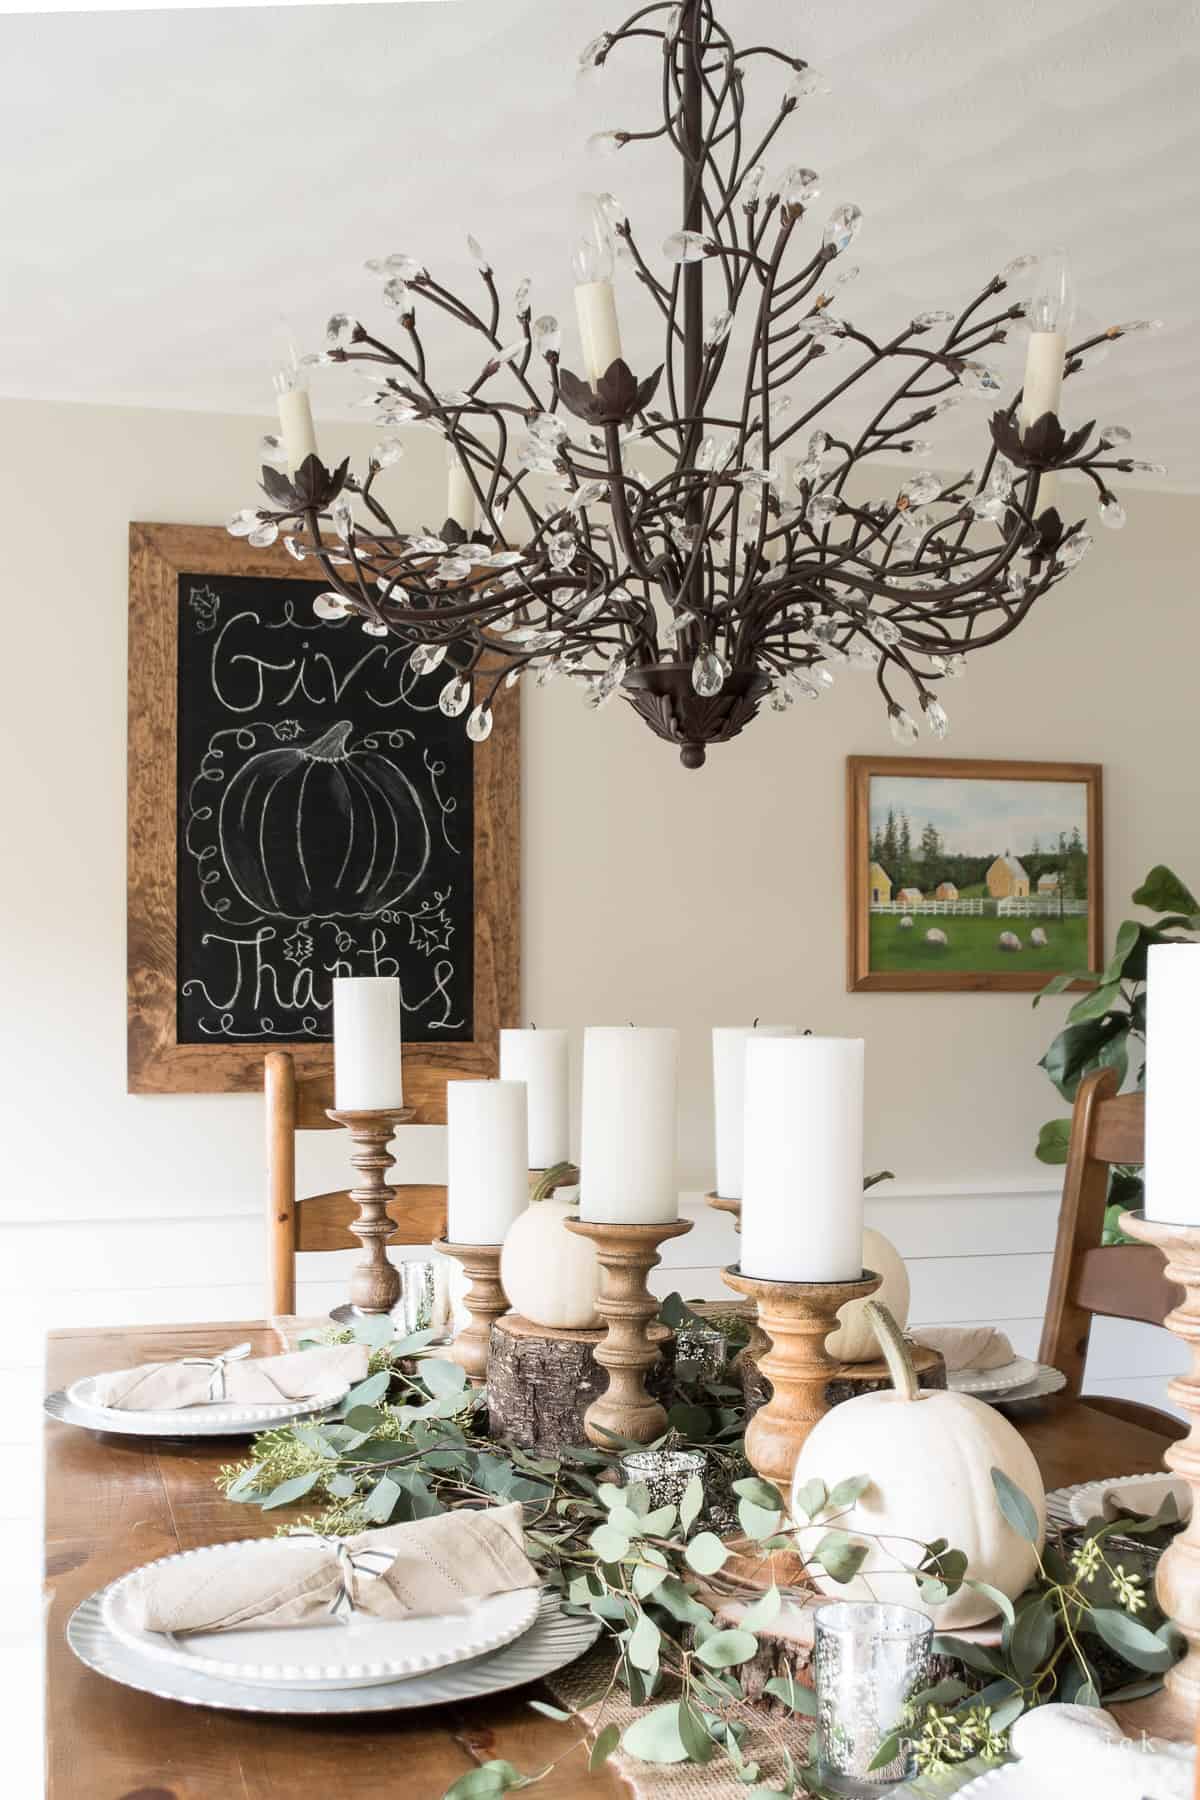 A fall-themed dining room table with a chandelier and pumpkins.